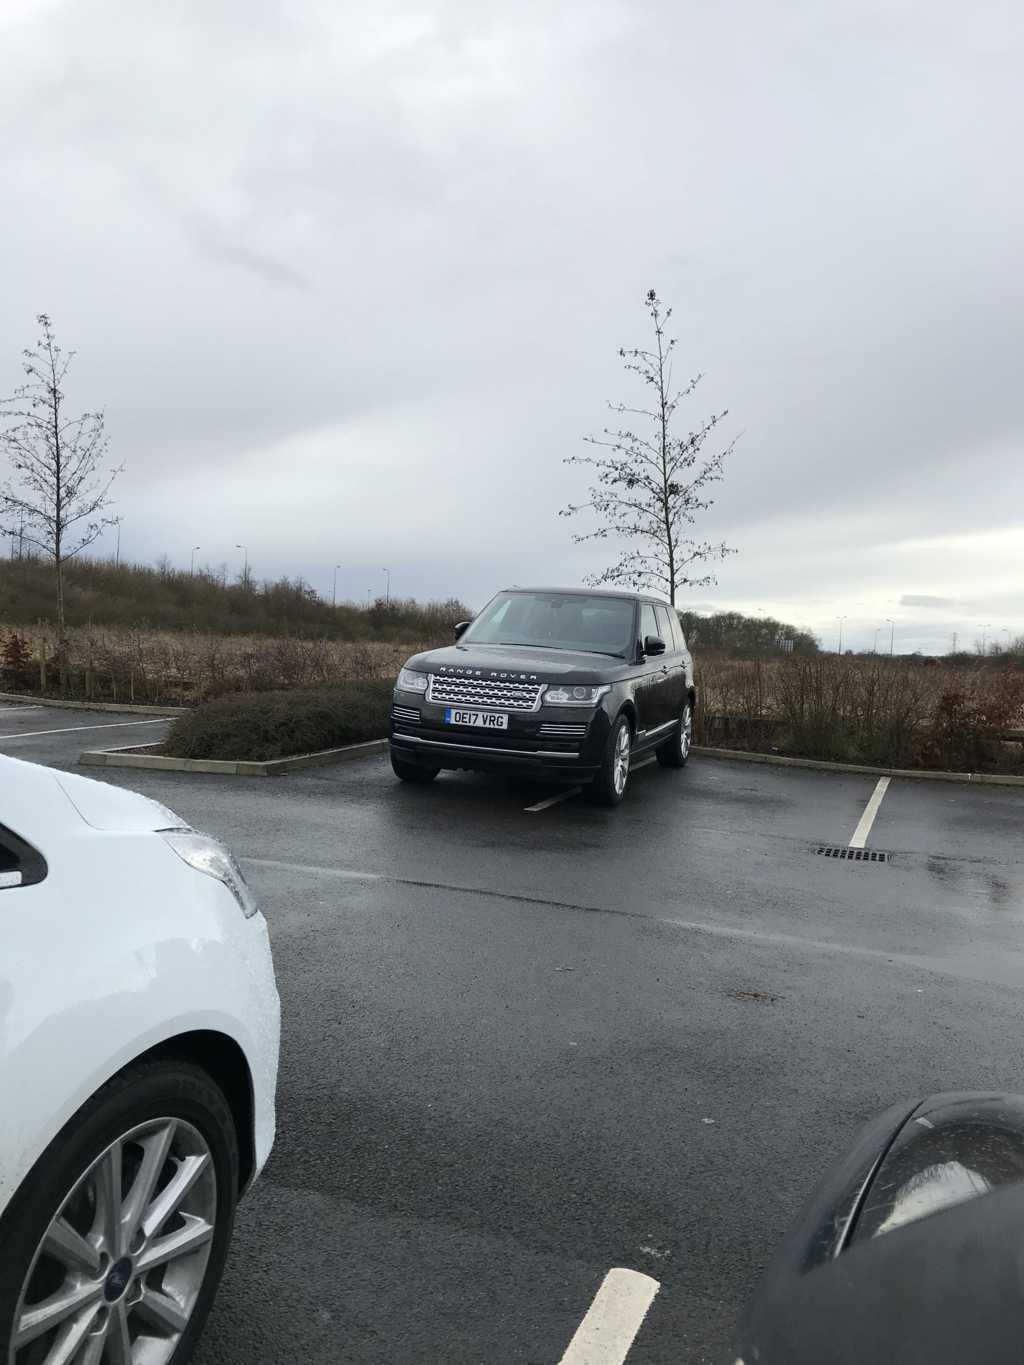 OE17 VRG displaying Inconsiderate Parking